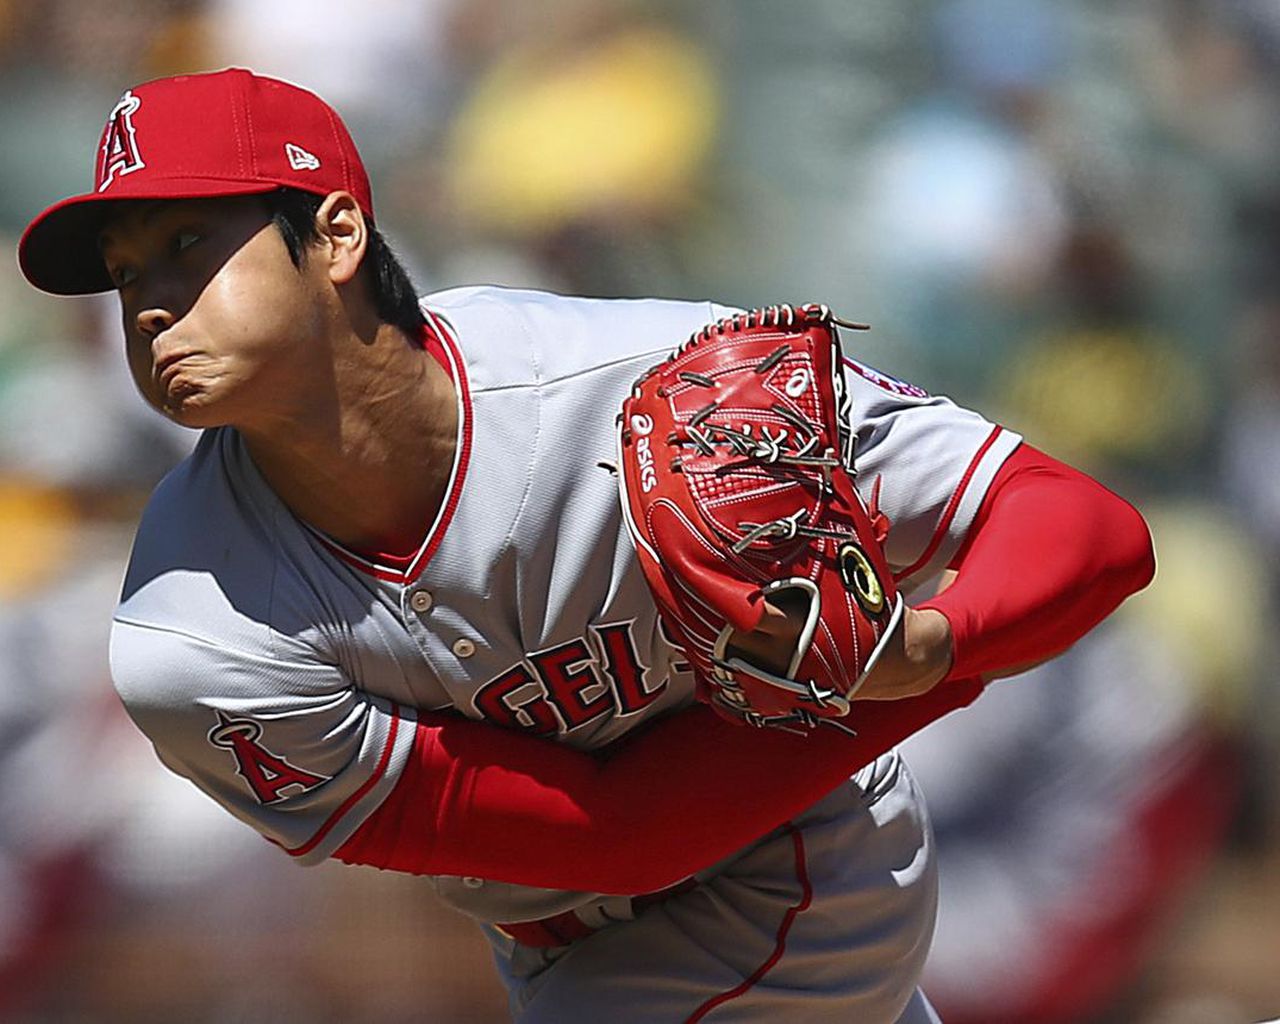 Shohei Ohtani gets a win for Angels in his MLB pitching debut